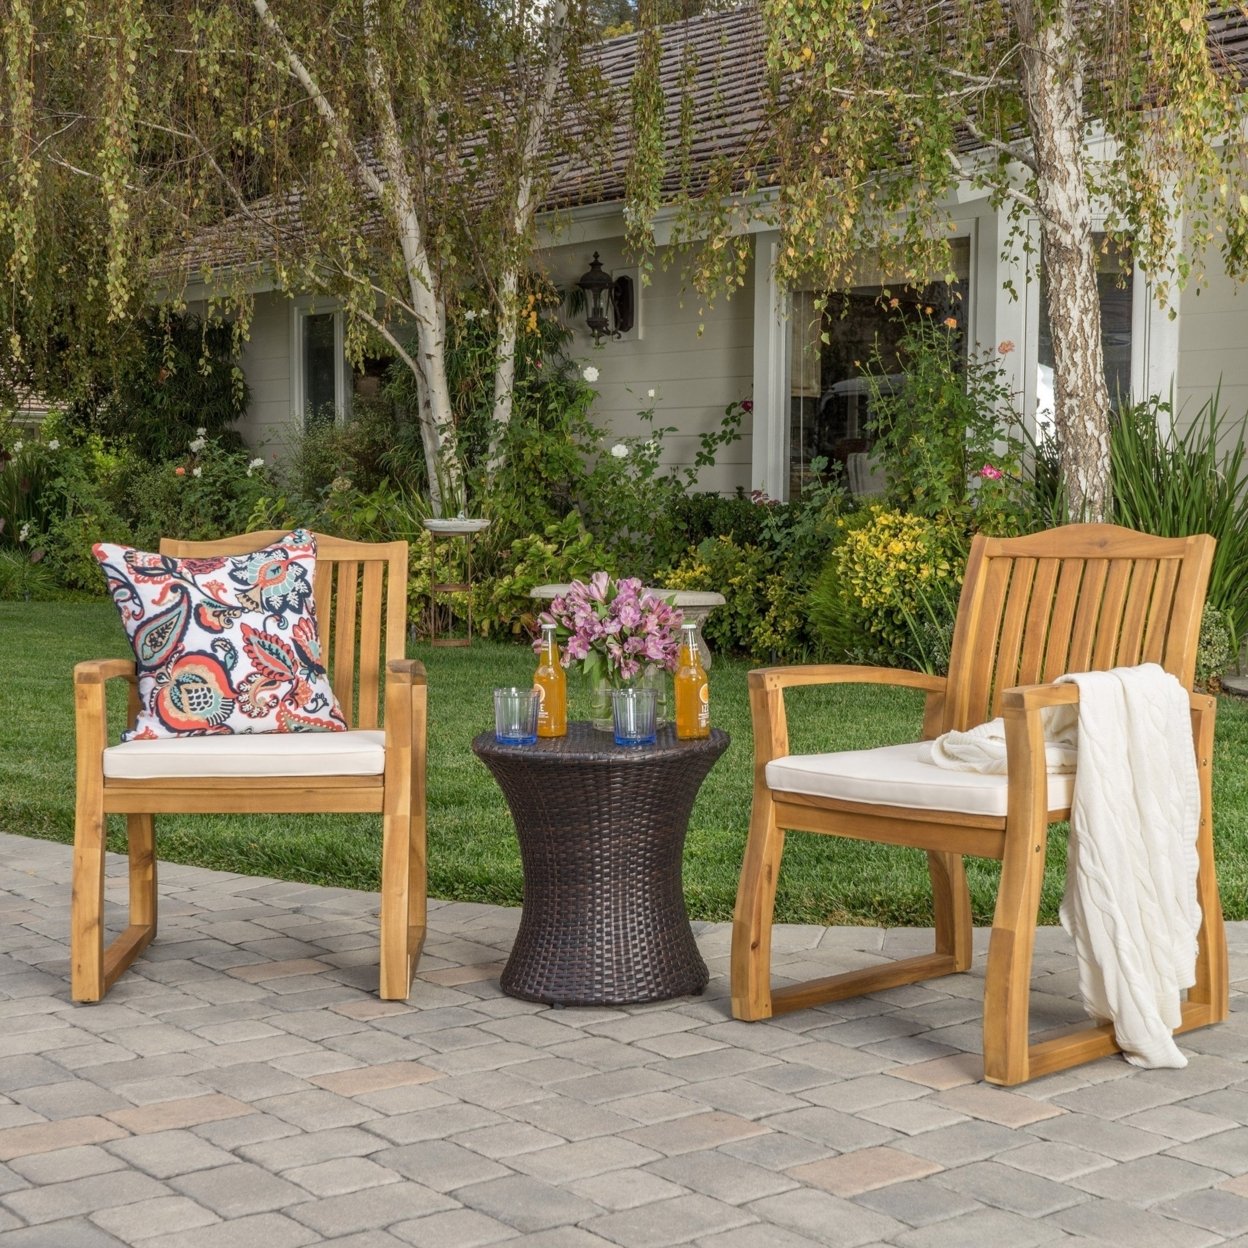 Malibu Outdoor Acacia Wood 3 Piece Chat Set With Wicker Table - Round Table, Default